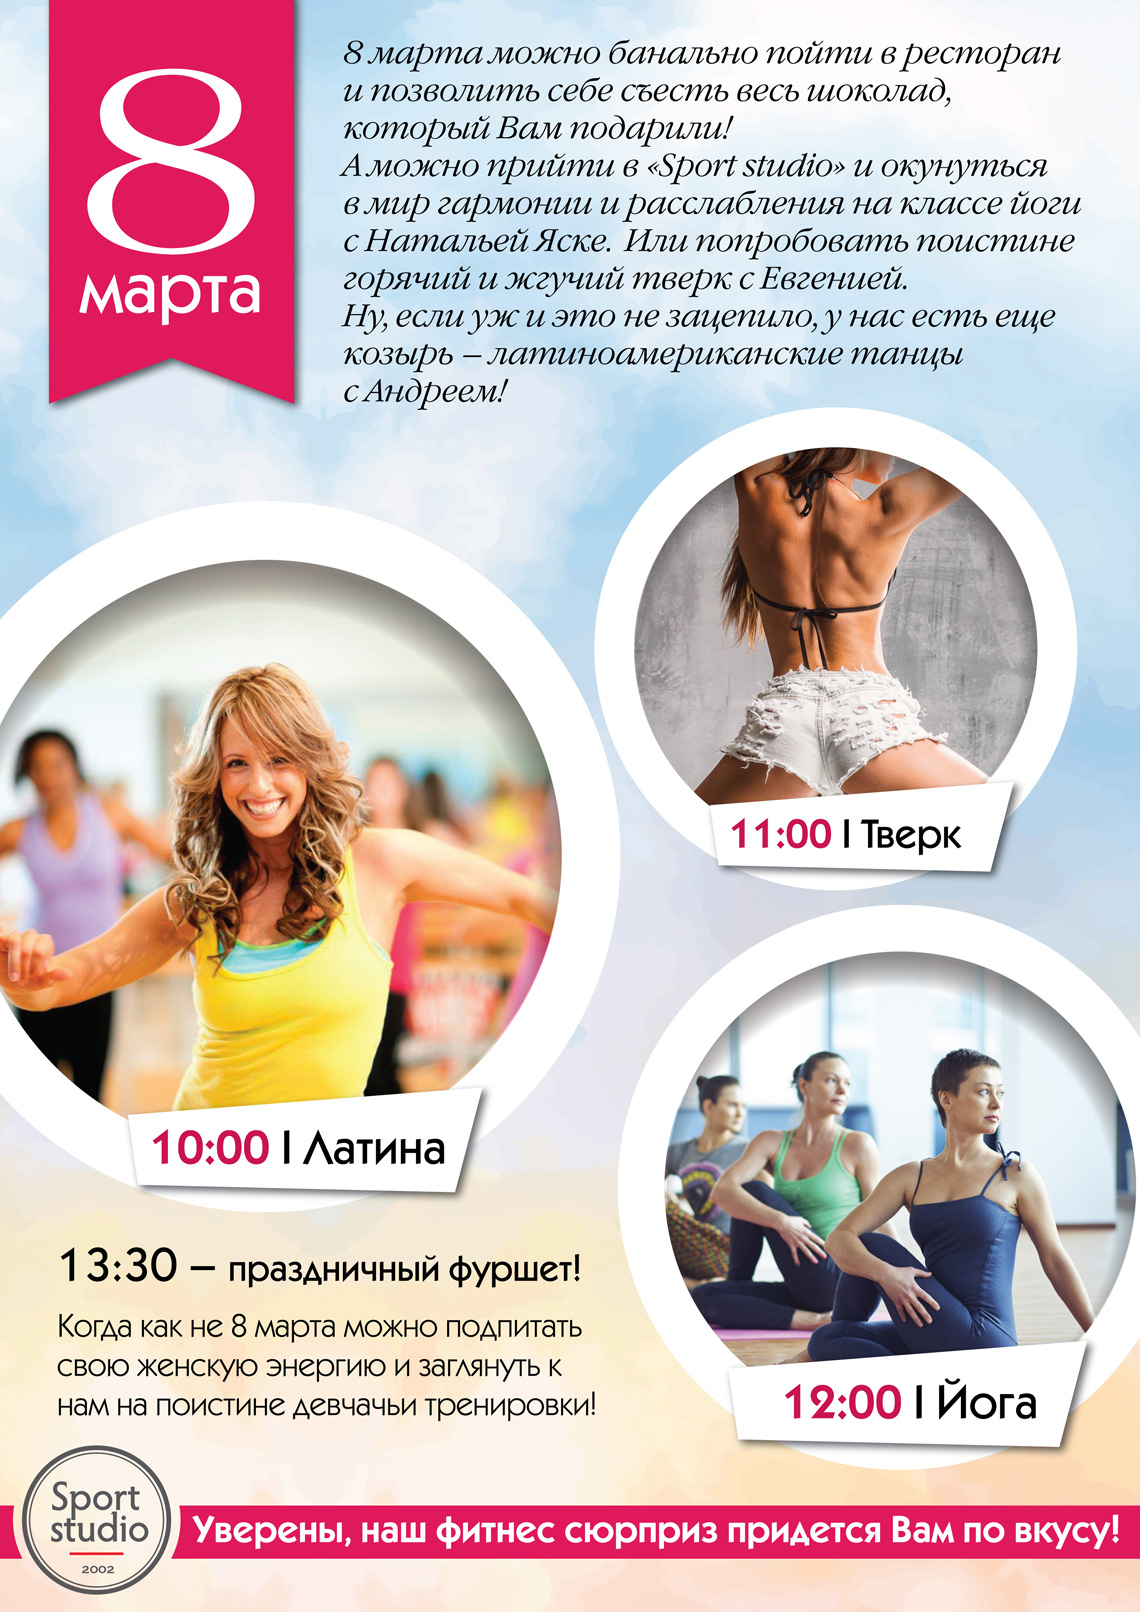 March 8 in the Fitness Club "Sport studio"